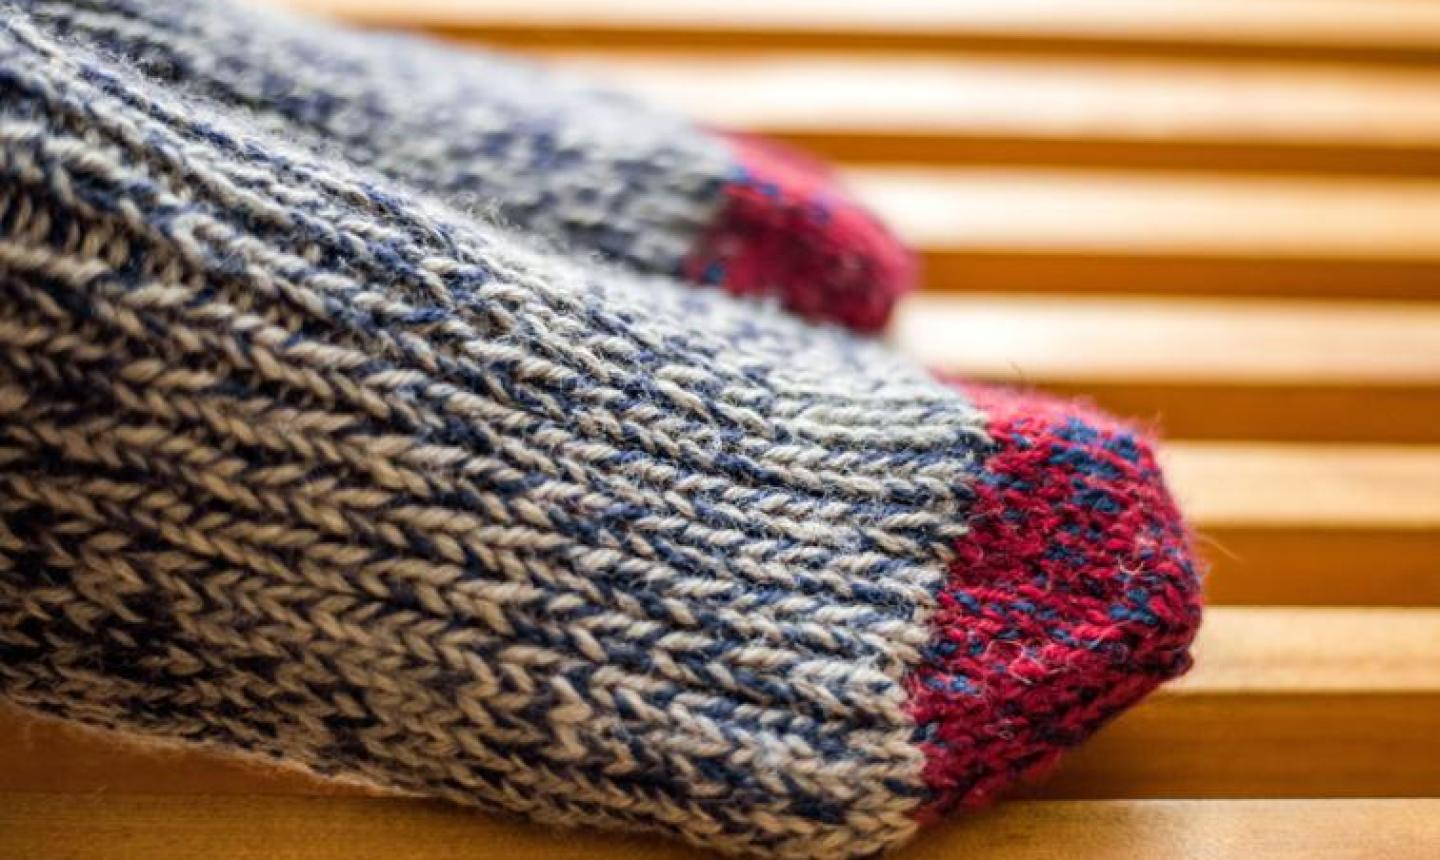 Knitting Sock Patterns For Beginners 7 Pro Tips For Sock Knitting Success Even If Its Your First Time